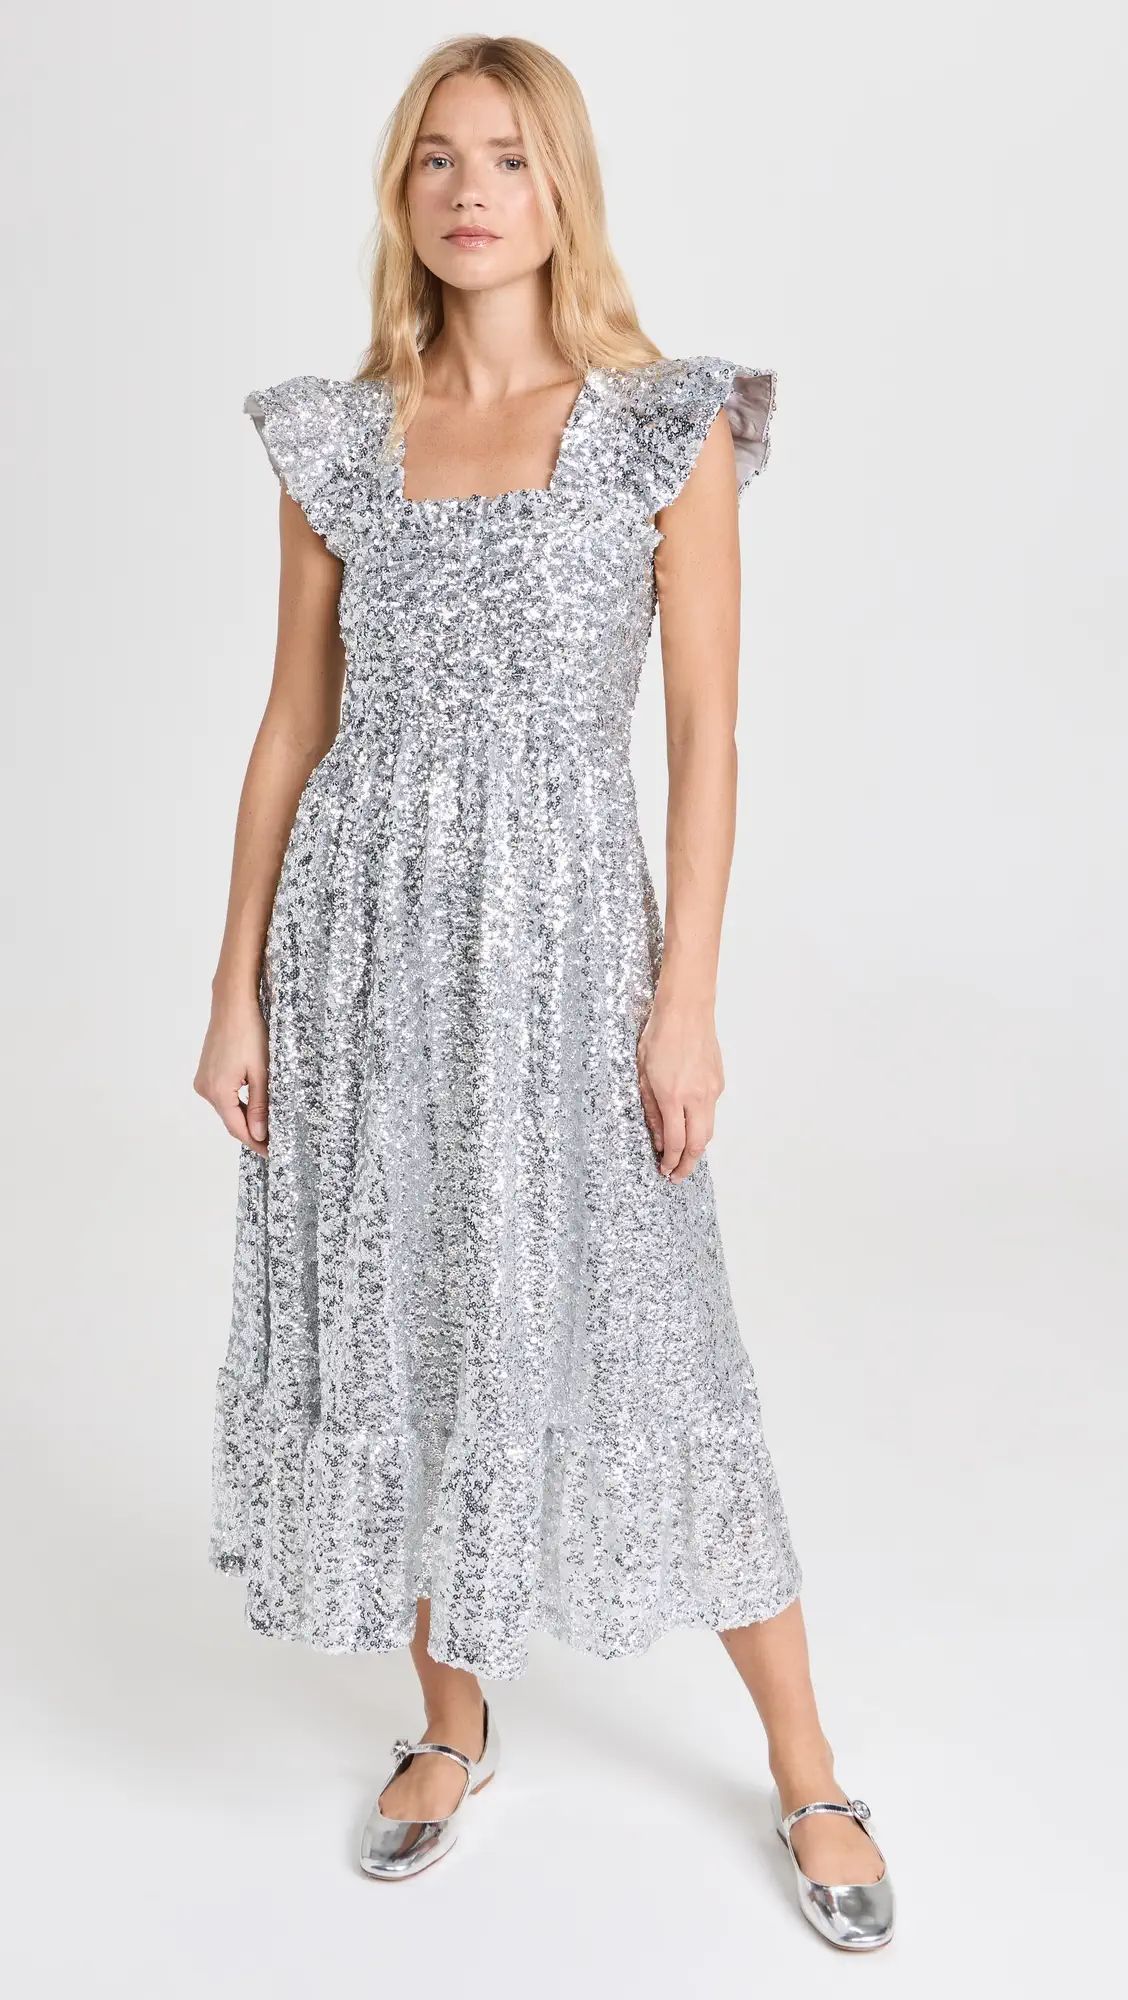 Hill House Home The Collector's Edition Ellie Nap Dress | Shopbop | Shopbop